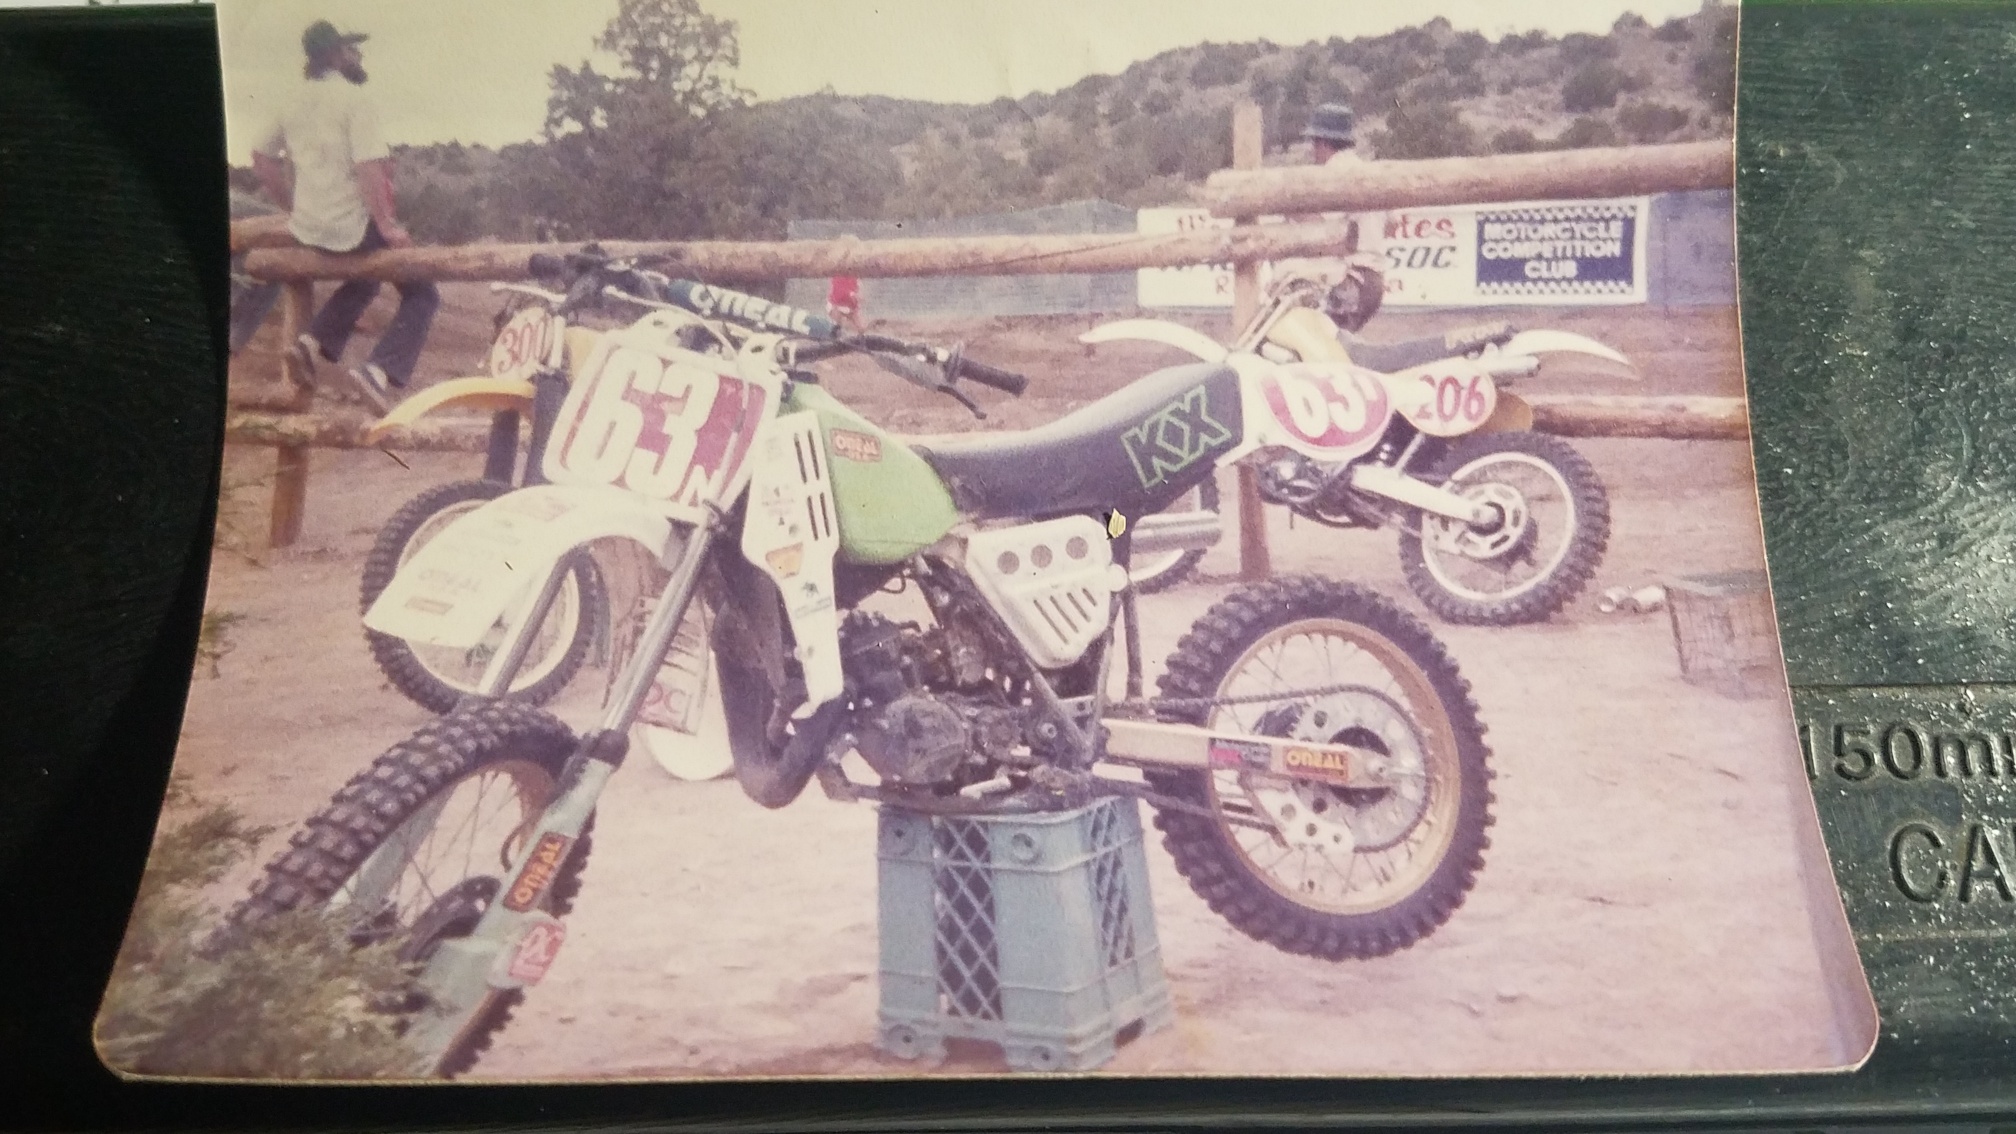 WANTED: 1982 KX125